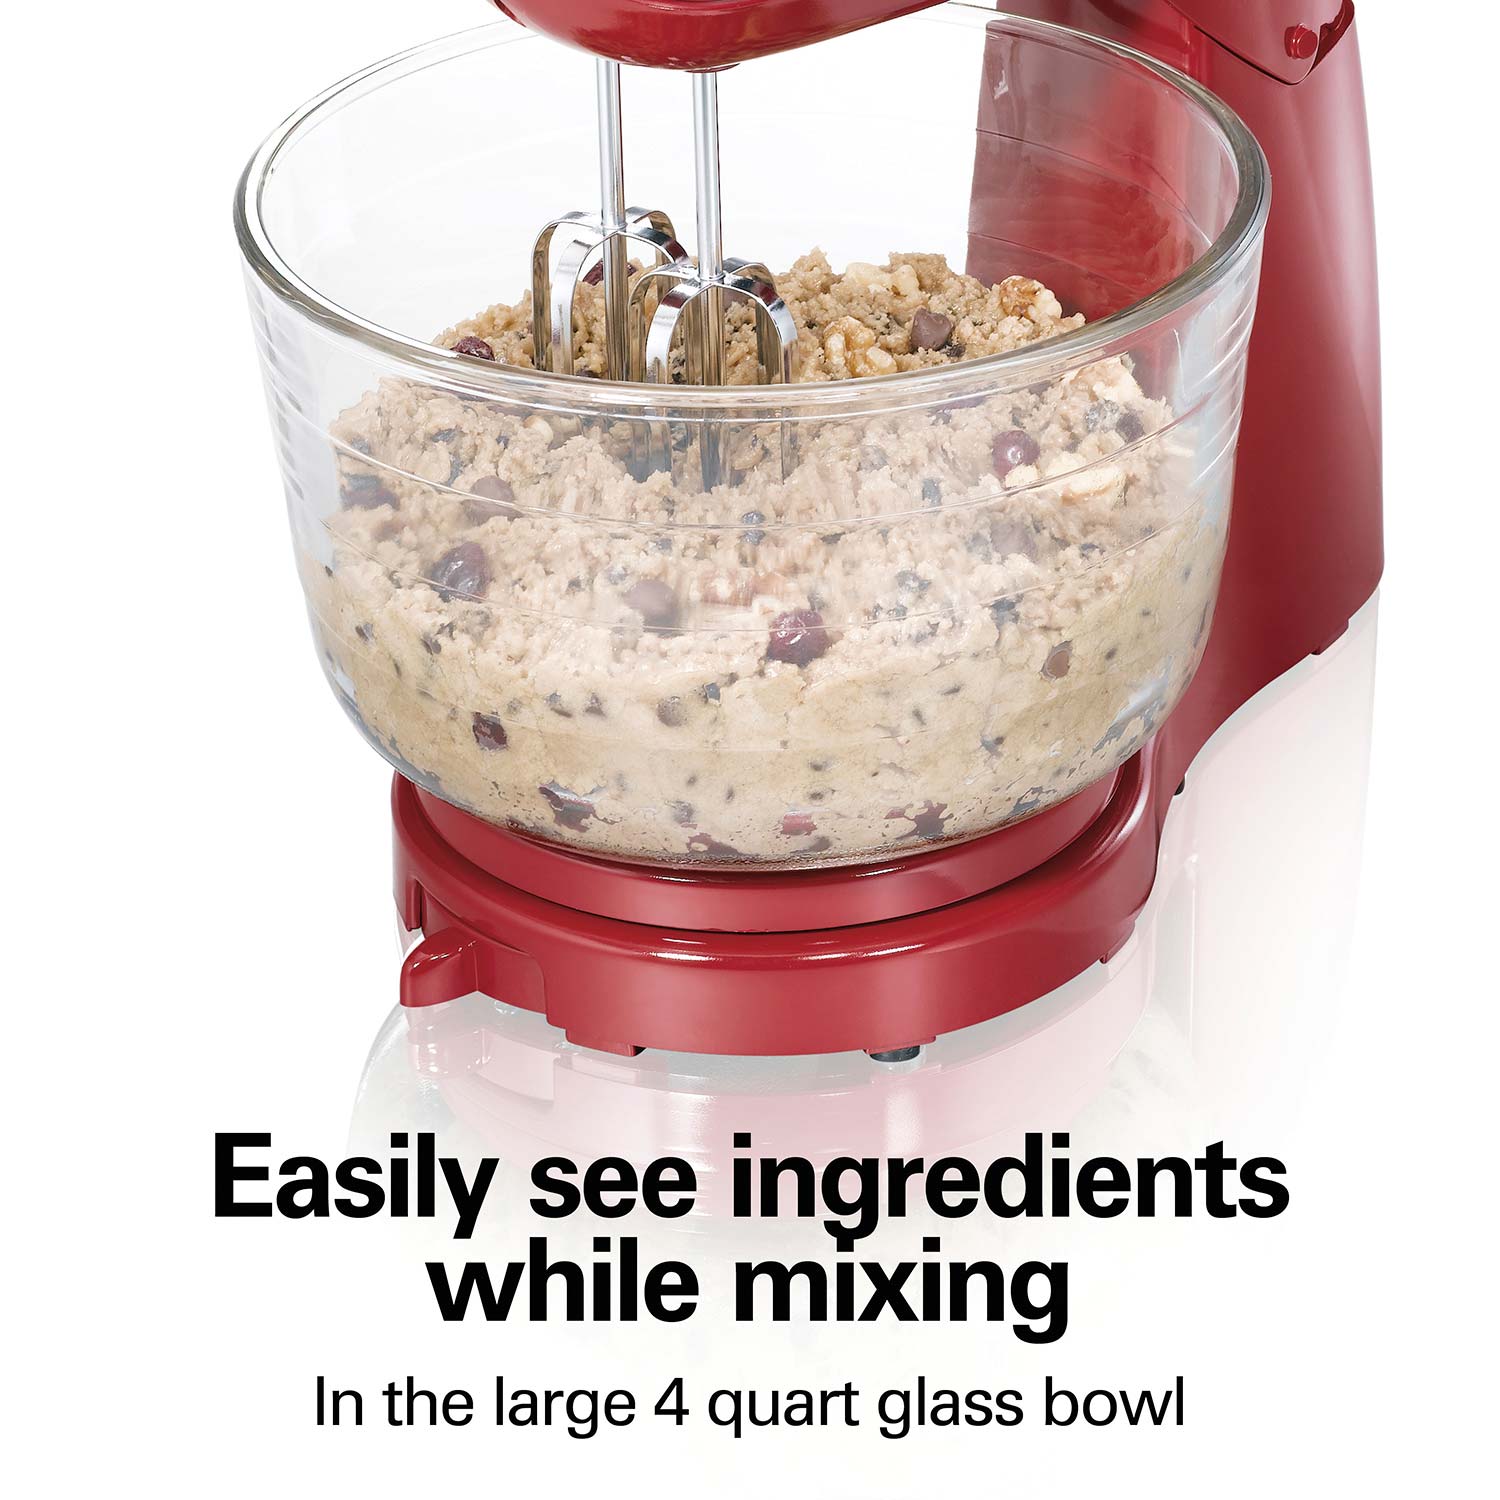 Power Deluxe™ 6 Speed Hand/Stand Mixer, Red - 64699